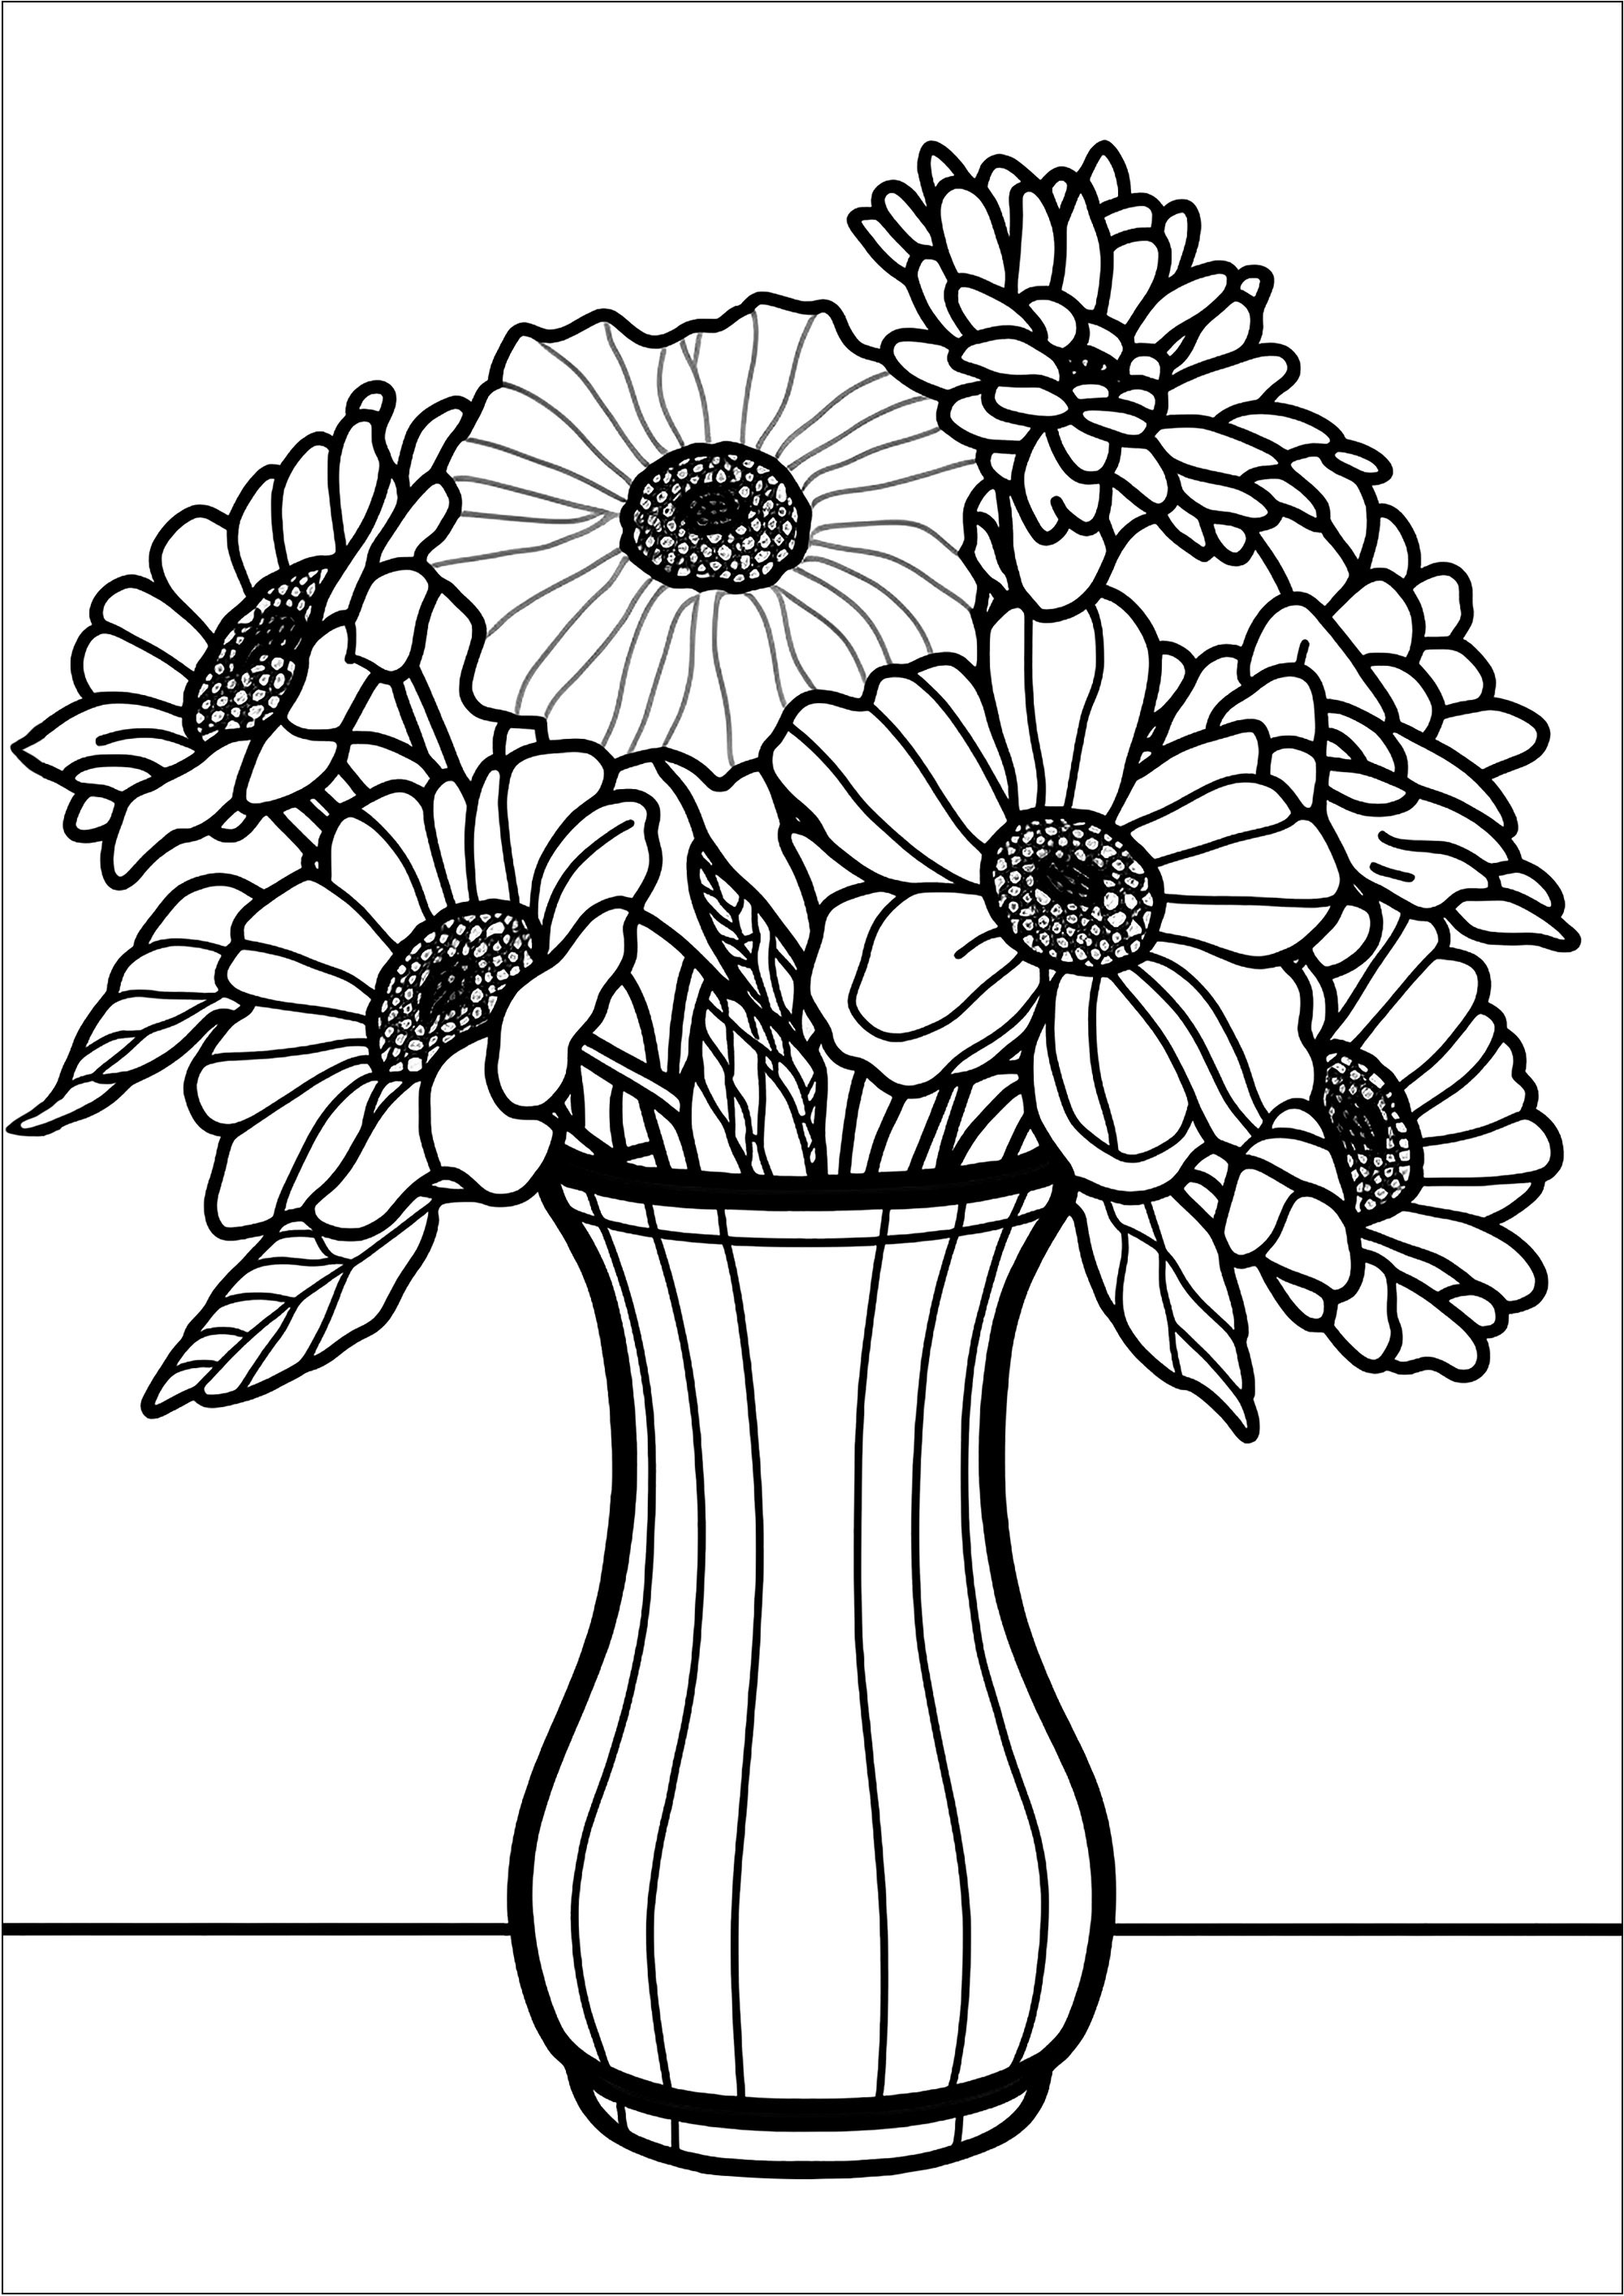 Nice drawing with thick lines of a bouquet of flowers in a vase. Kids can have fun choosing different colors for each flower and for the vase. They can even add extra details, like butterflies or small animals, to make their creation even more unique.